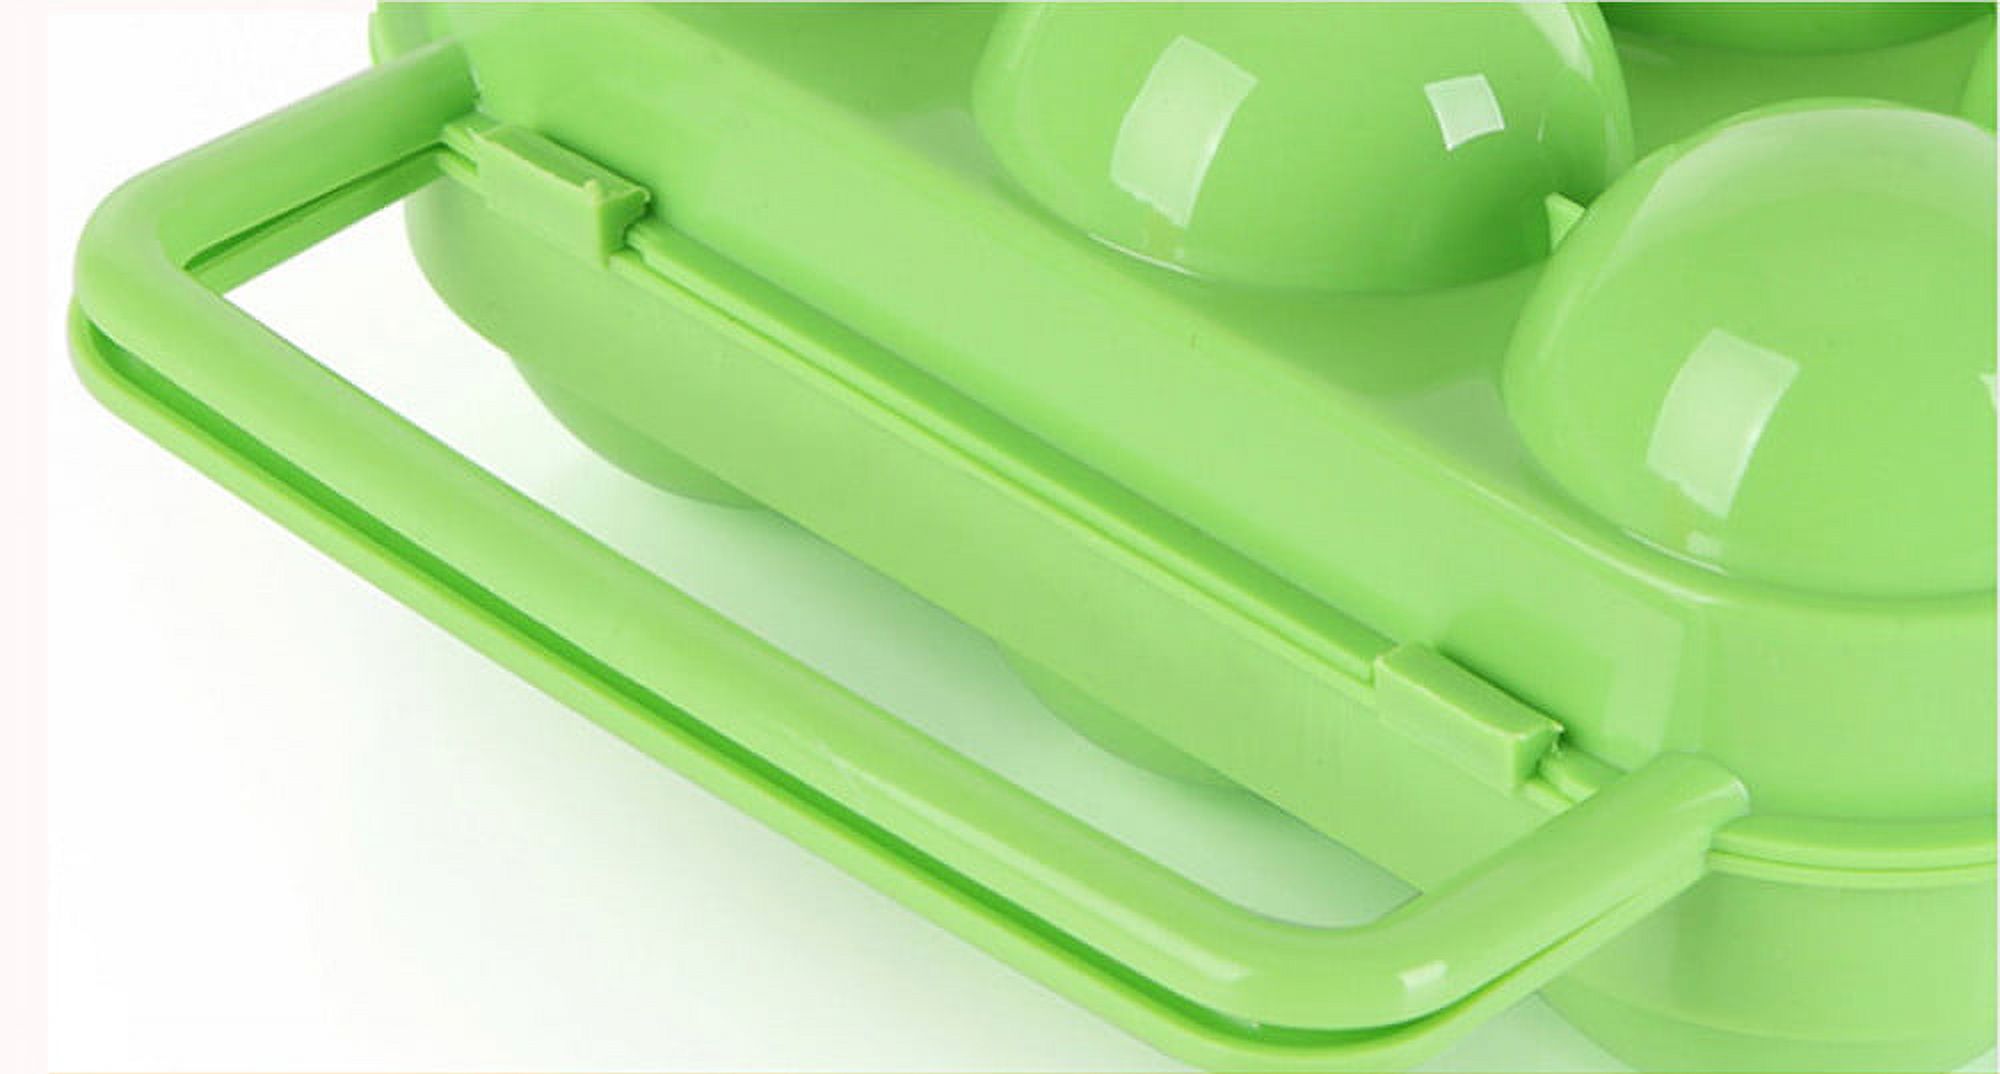 Wiueurtly Plastic Storage Bins With Lids And Handles,Eggs Storage,Hefty Green Storage Bins With Lids,Storage Containers,Portable 6 Eggs Plastic Container Holder Folding Egg Storage Box Handle Case - image 4 of 4